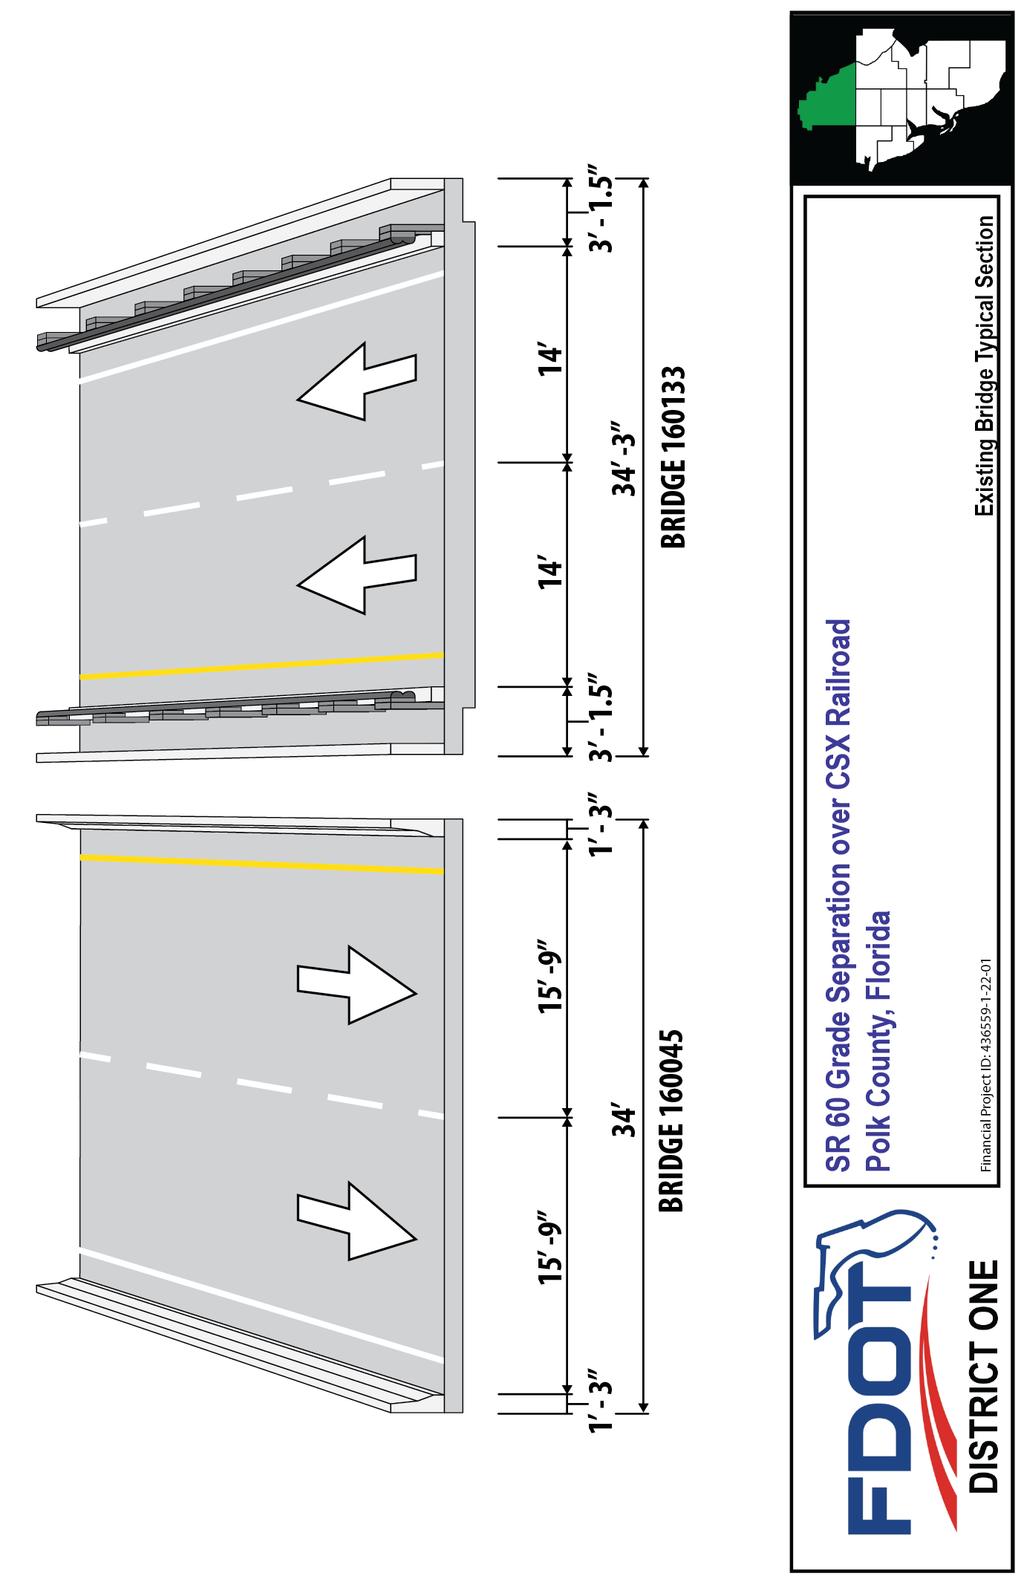 Figure 3: Existing Roadway Typical Section for the WB and EB bridges